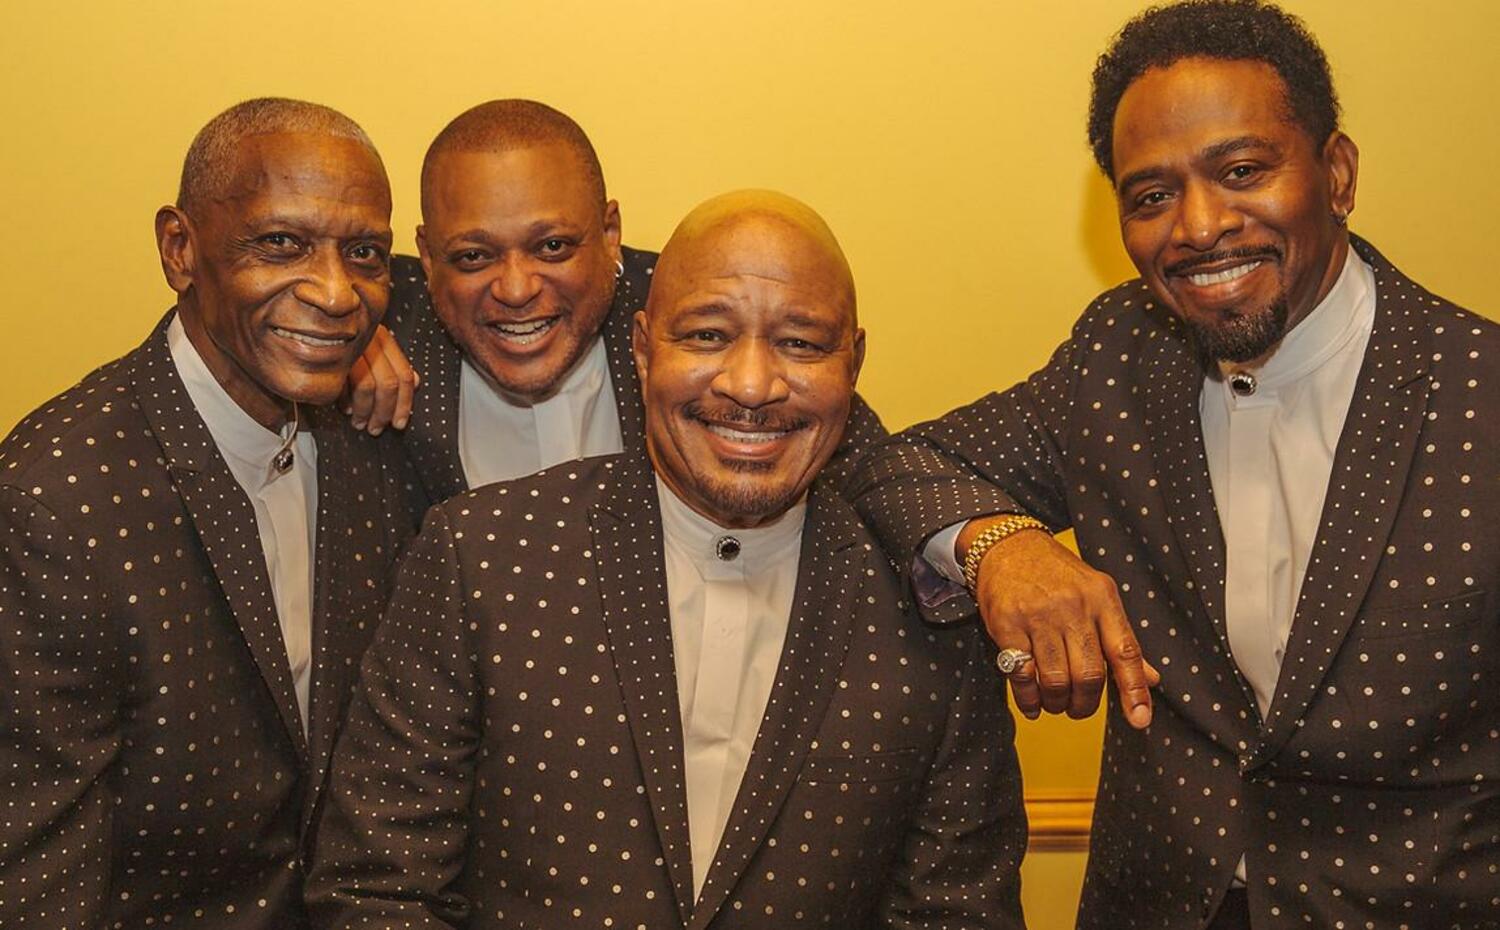 The Stylistics perform at Suffolk Theater on June 16. COURTESY SUFFOLK THEATER